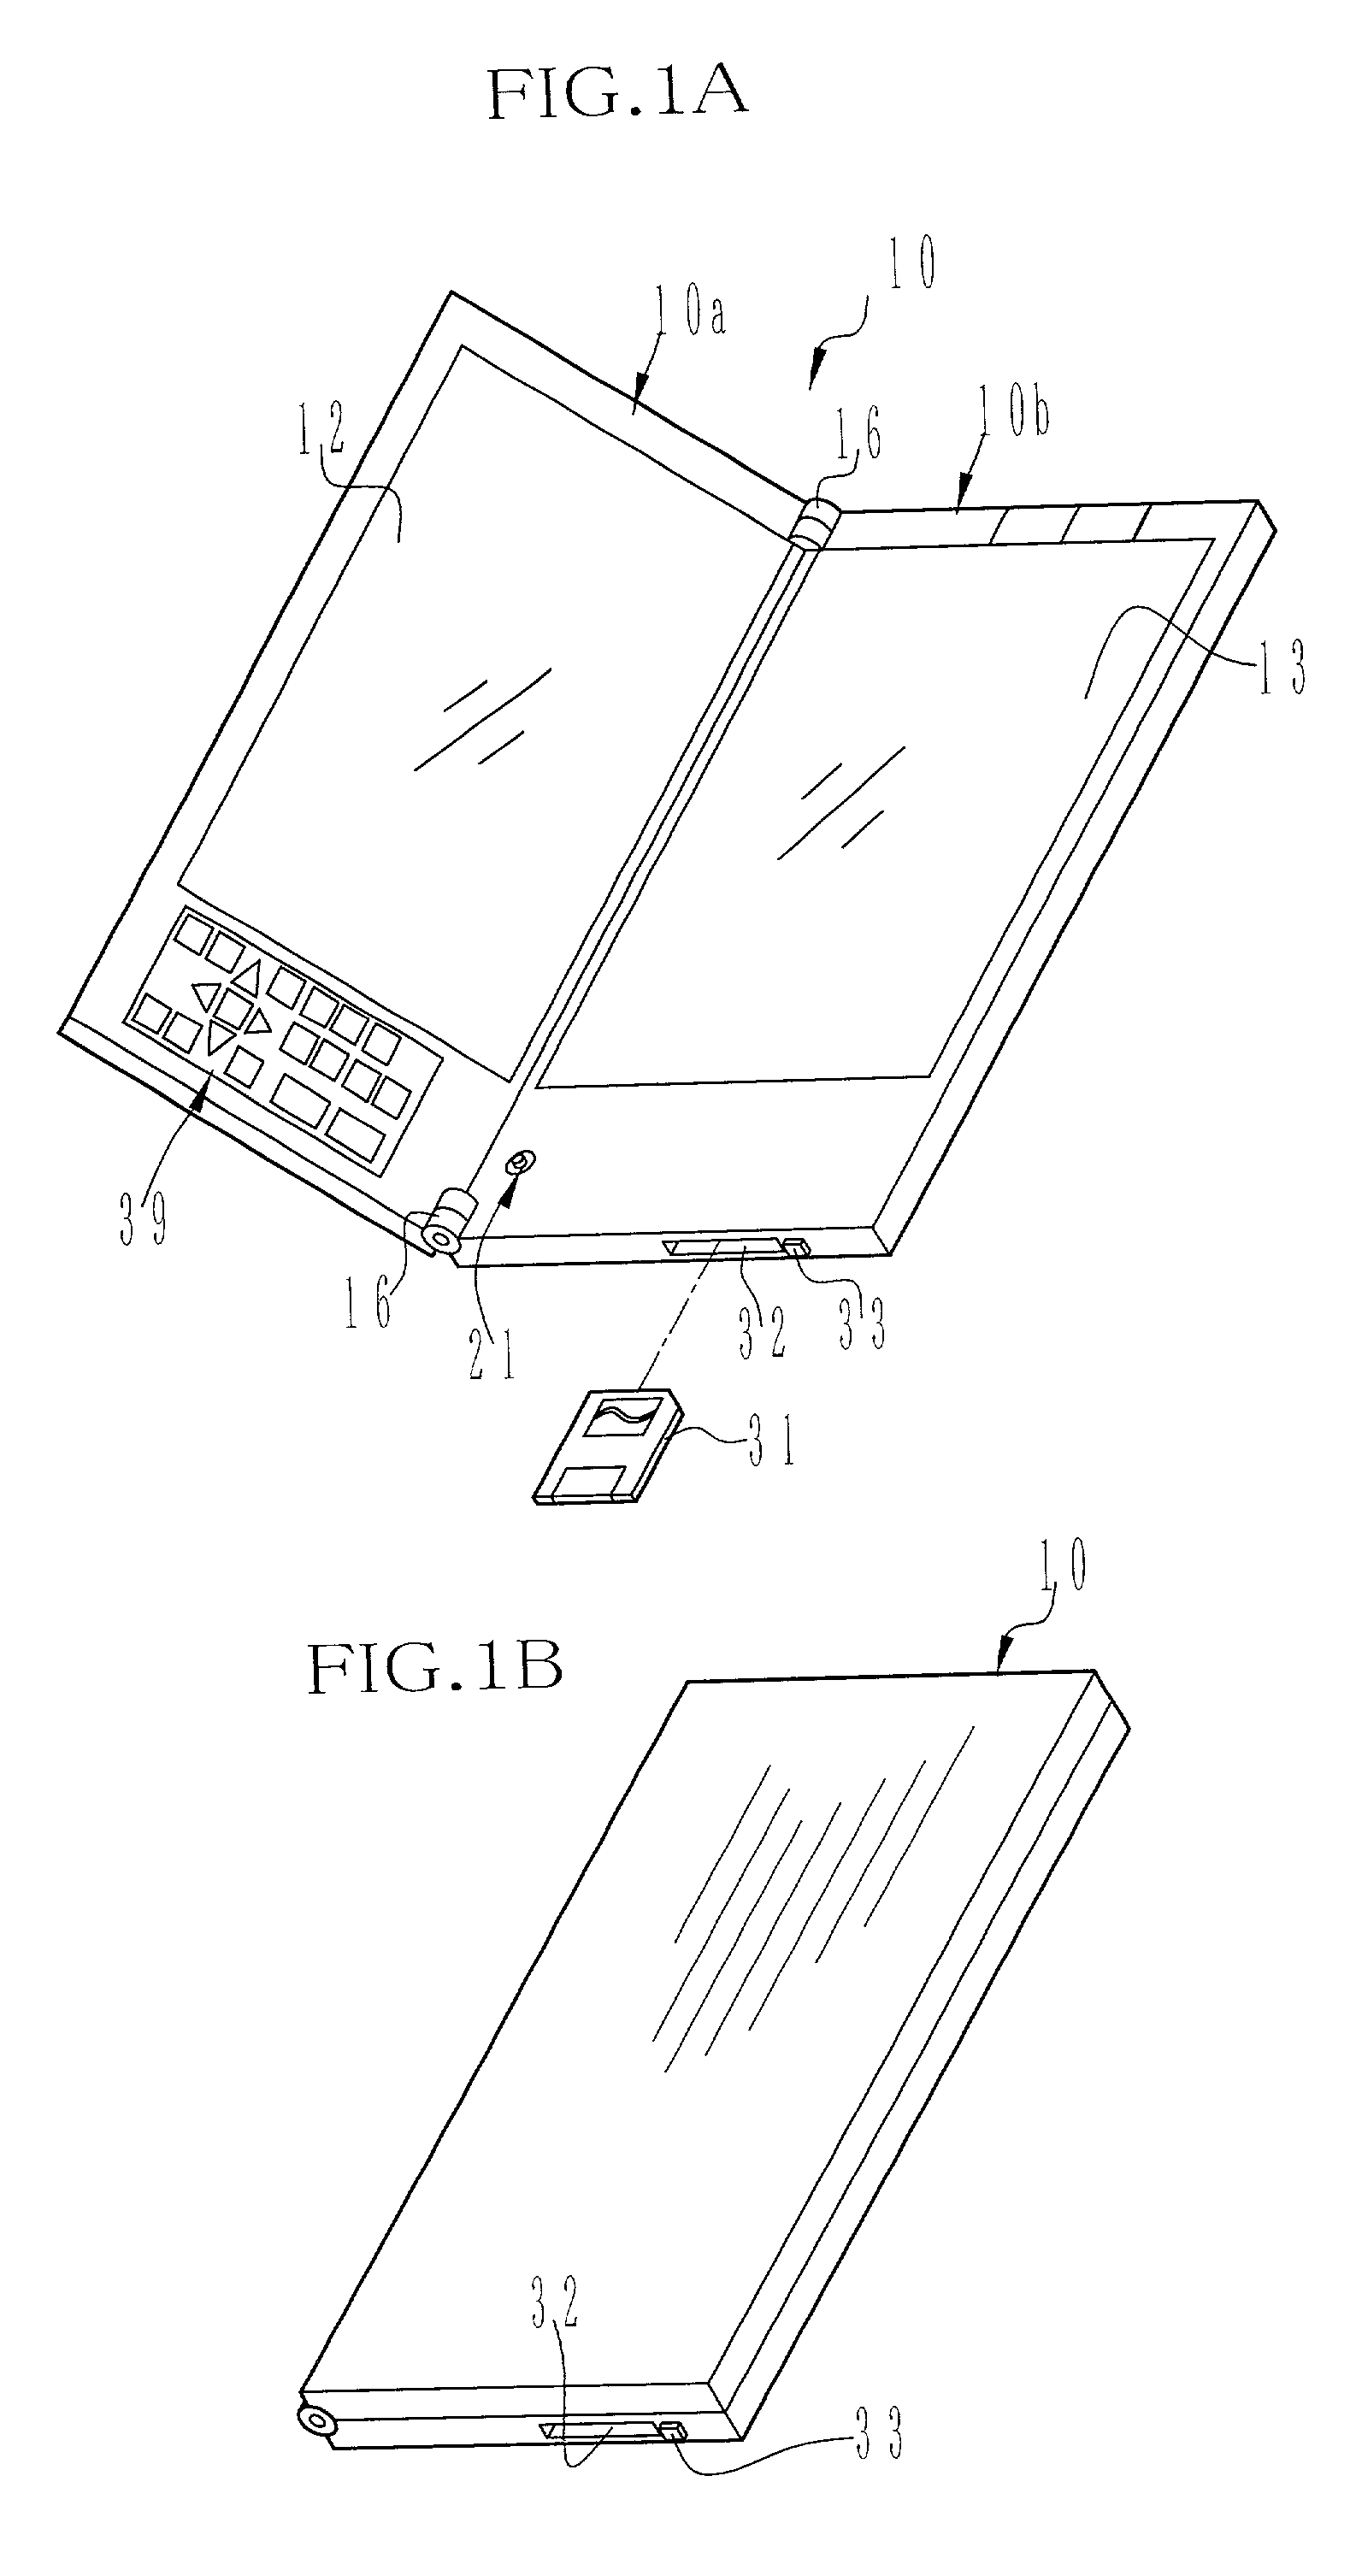 Electronic image display device and printing system therefor